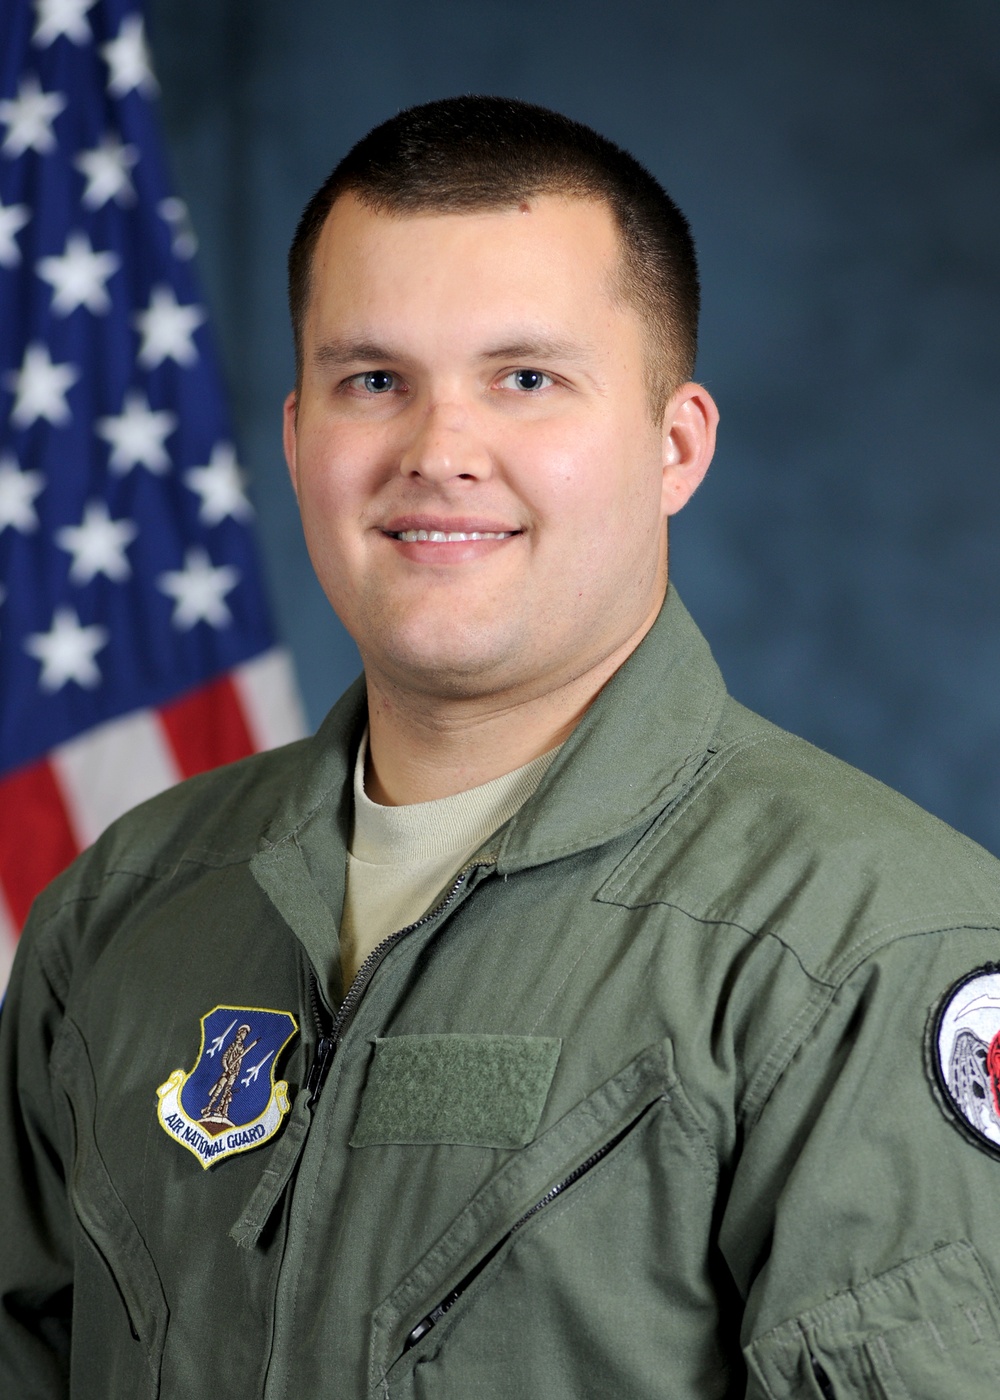 Air National Guard Tech. Sgt. Jason Oehlbeck, a Webster resident, receives medals for saving life on Sunday